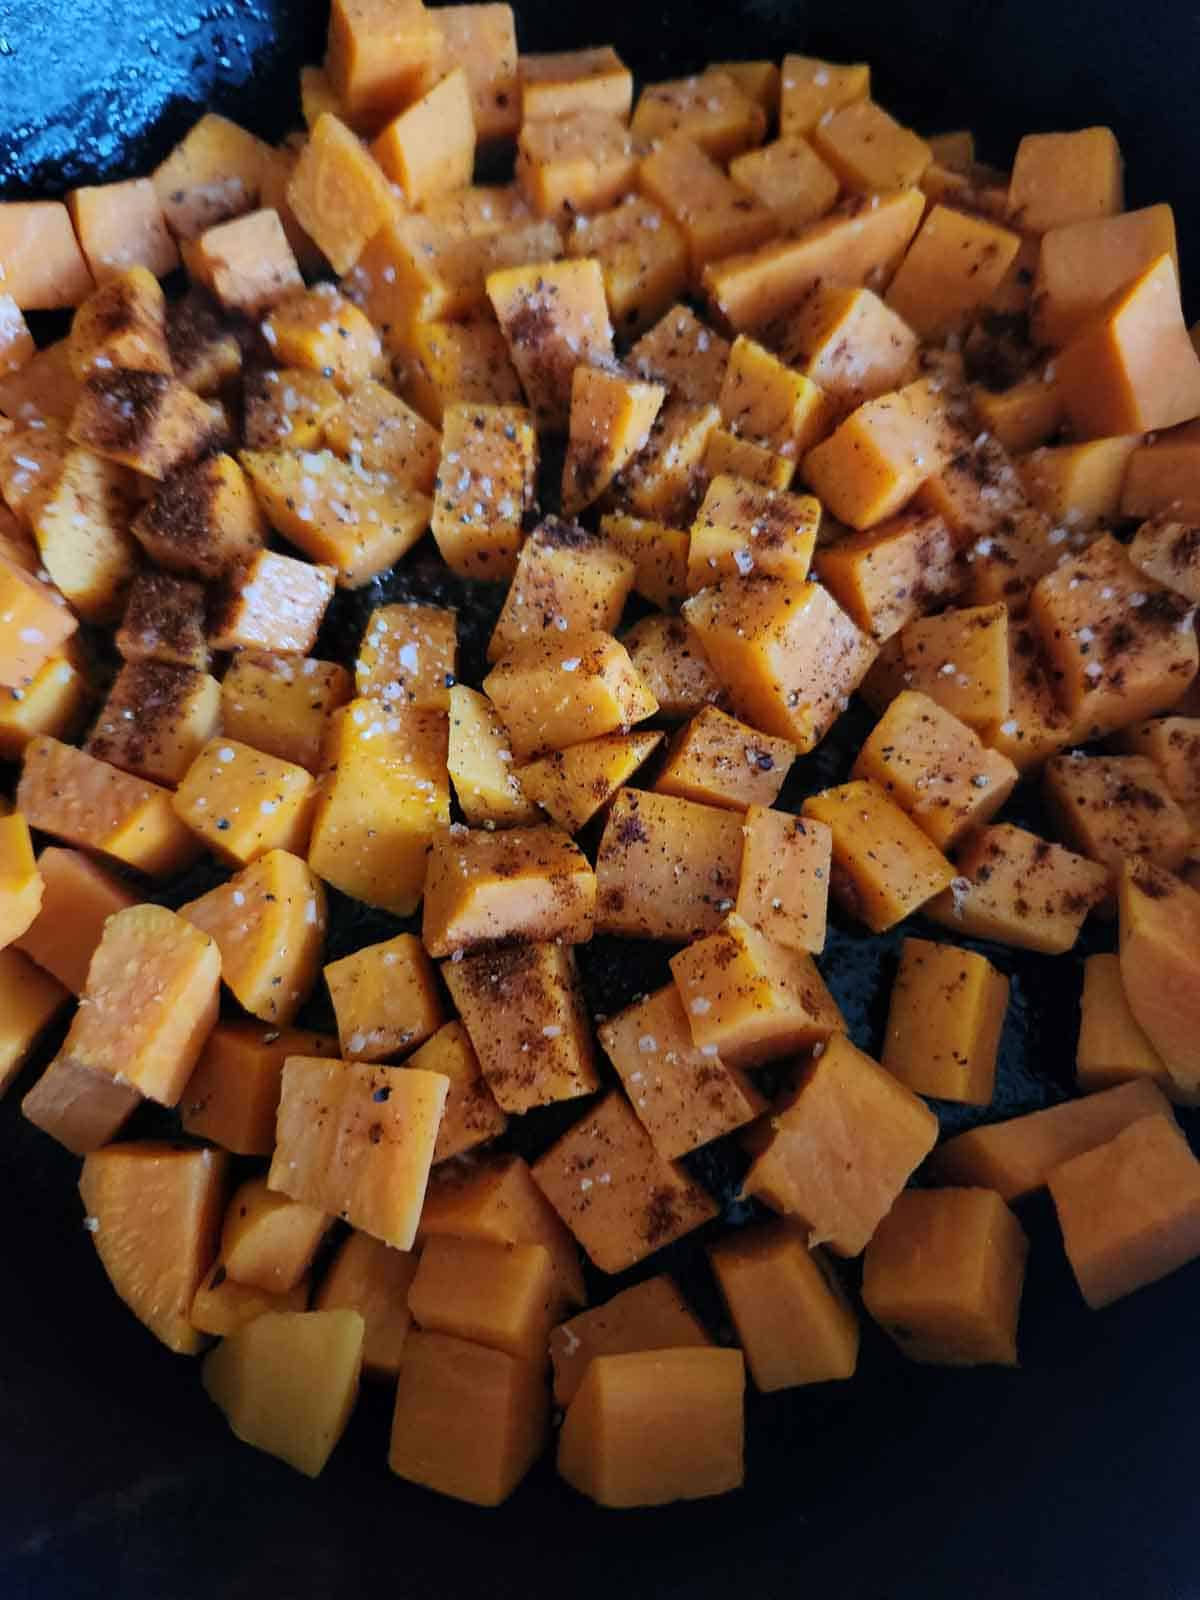 Cooking sweet potatoes and spices in a skillet.